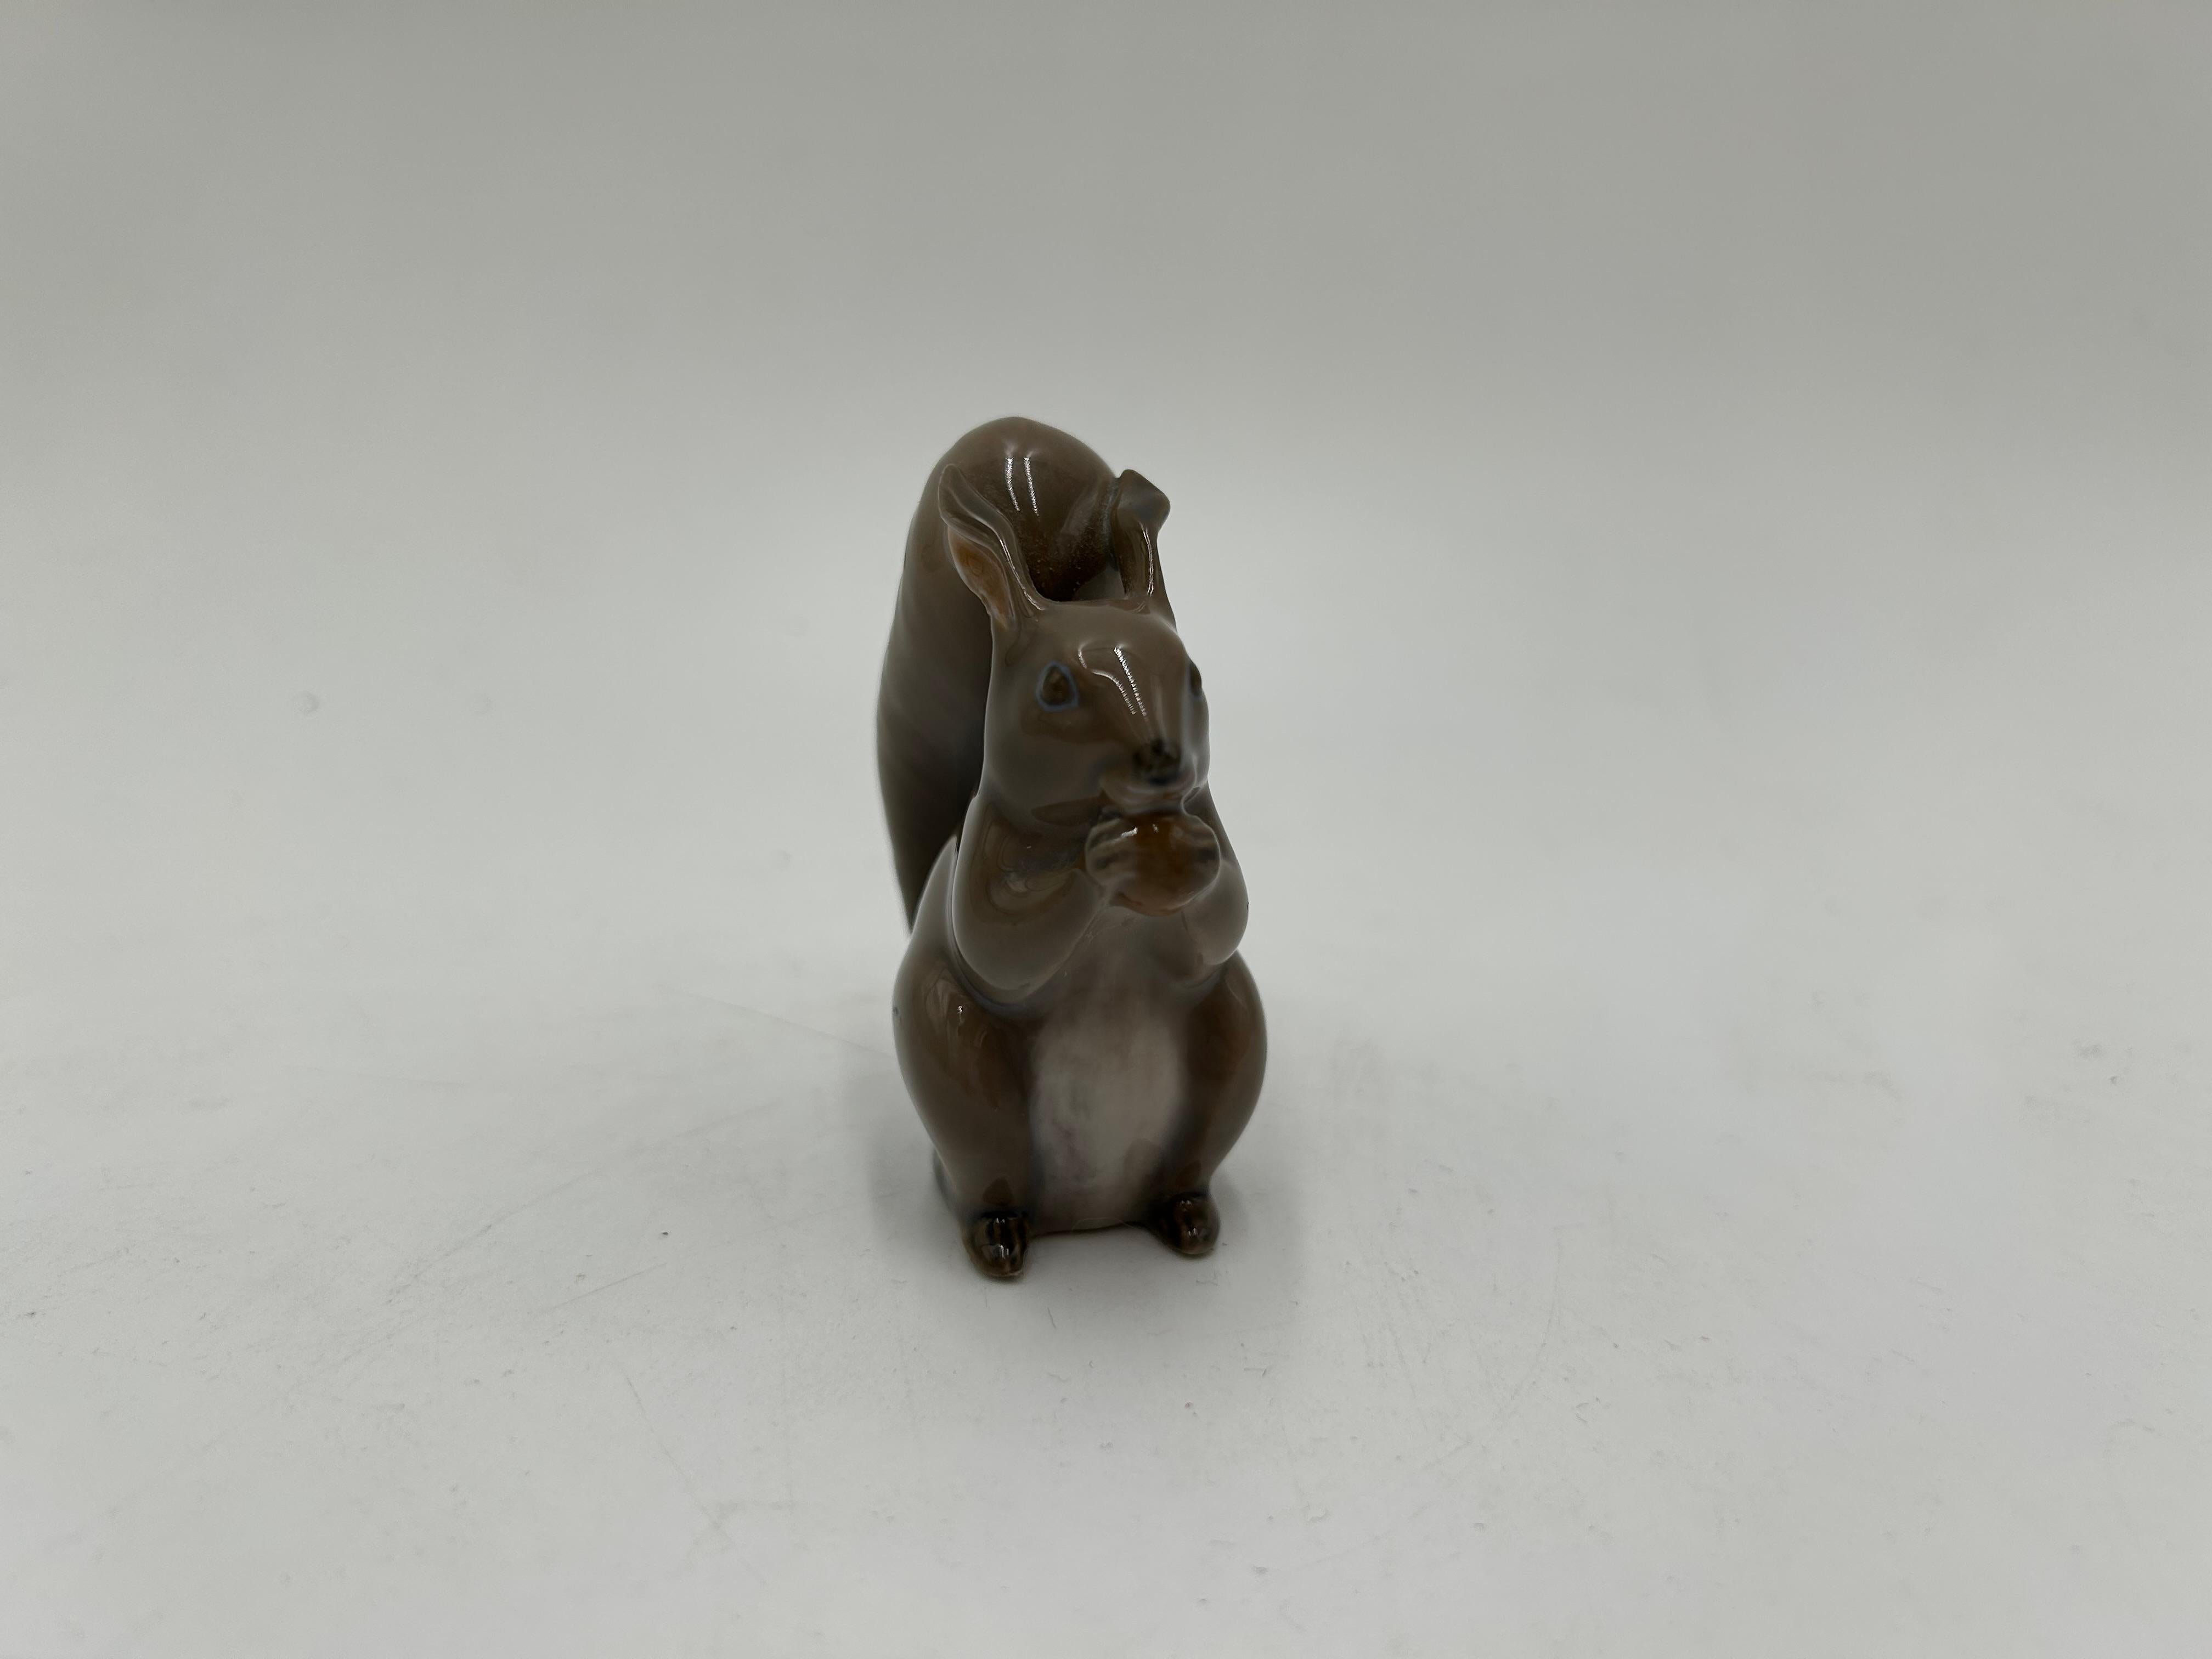 Porcelain figurine of a squirrel model #982
Produced by the Danish manufacture Royal Copenhagen
Mark used in the 1960s.
Very good condition, no damage
Measures: Height: 7cm
Width: 3cm
Depth: 5cm